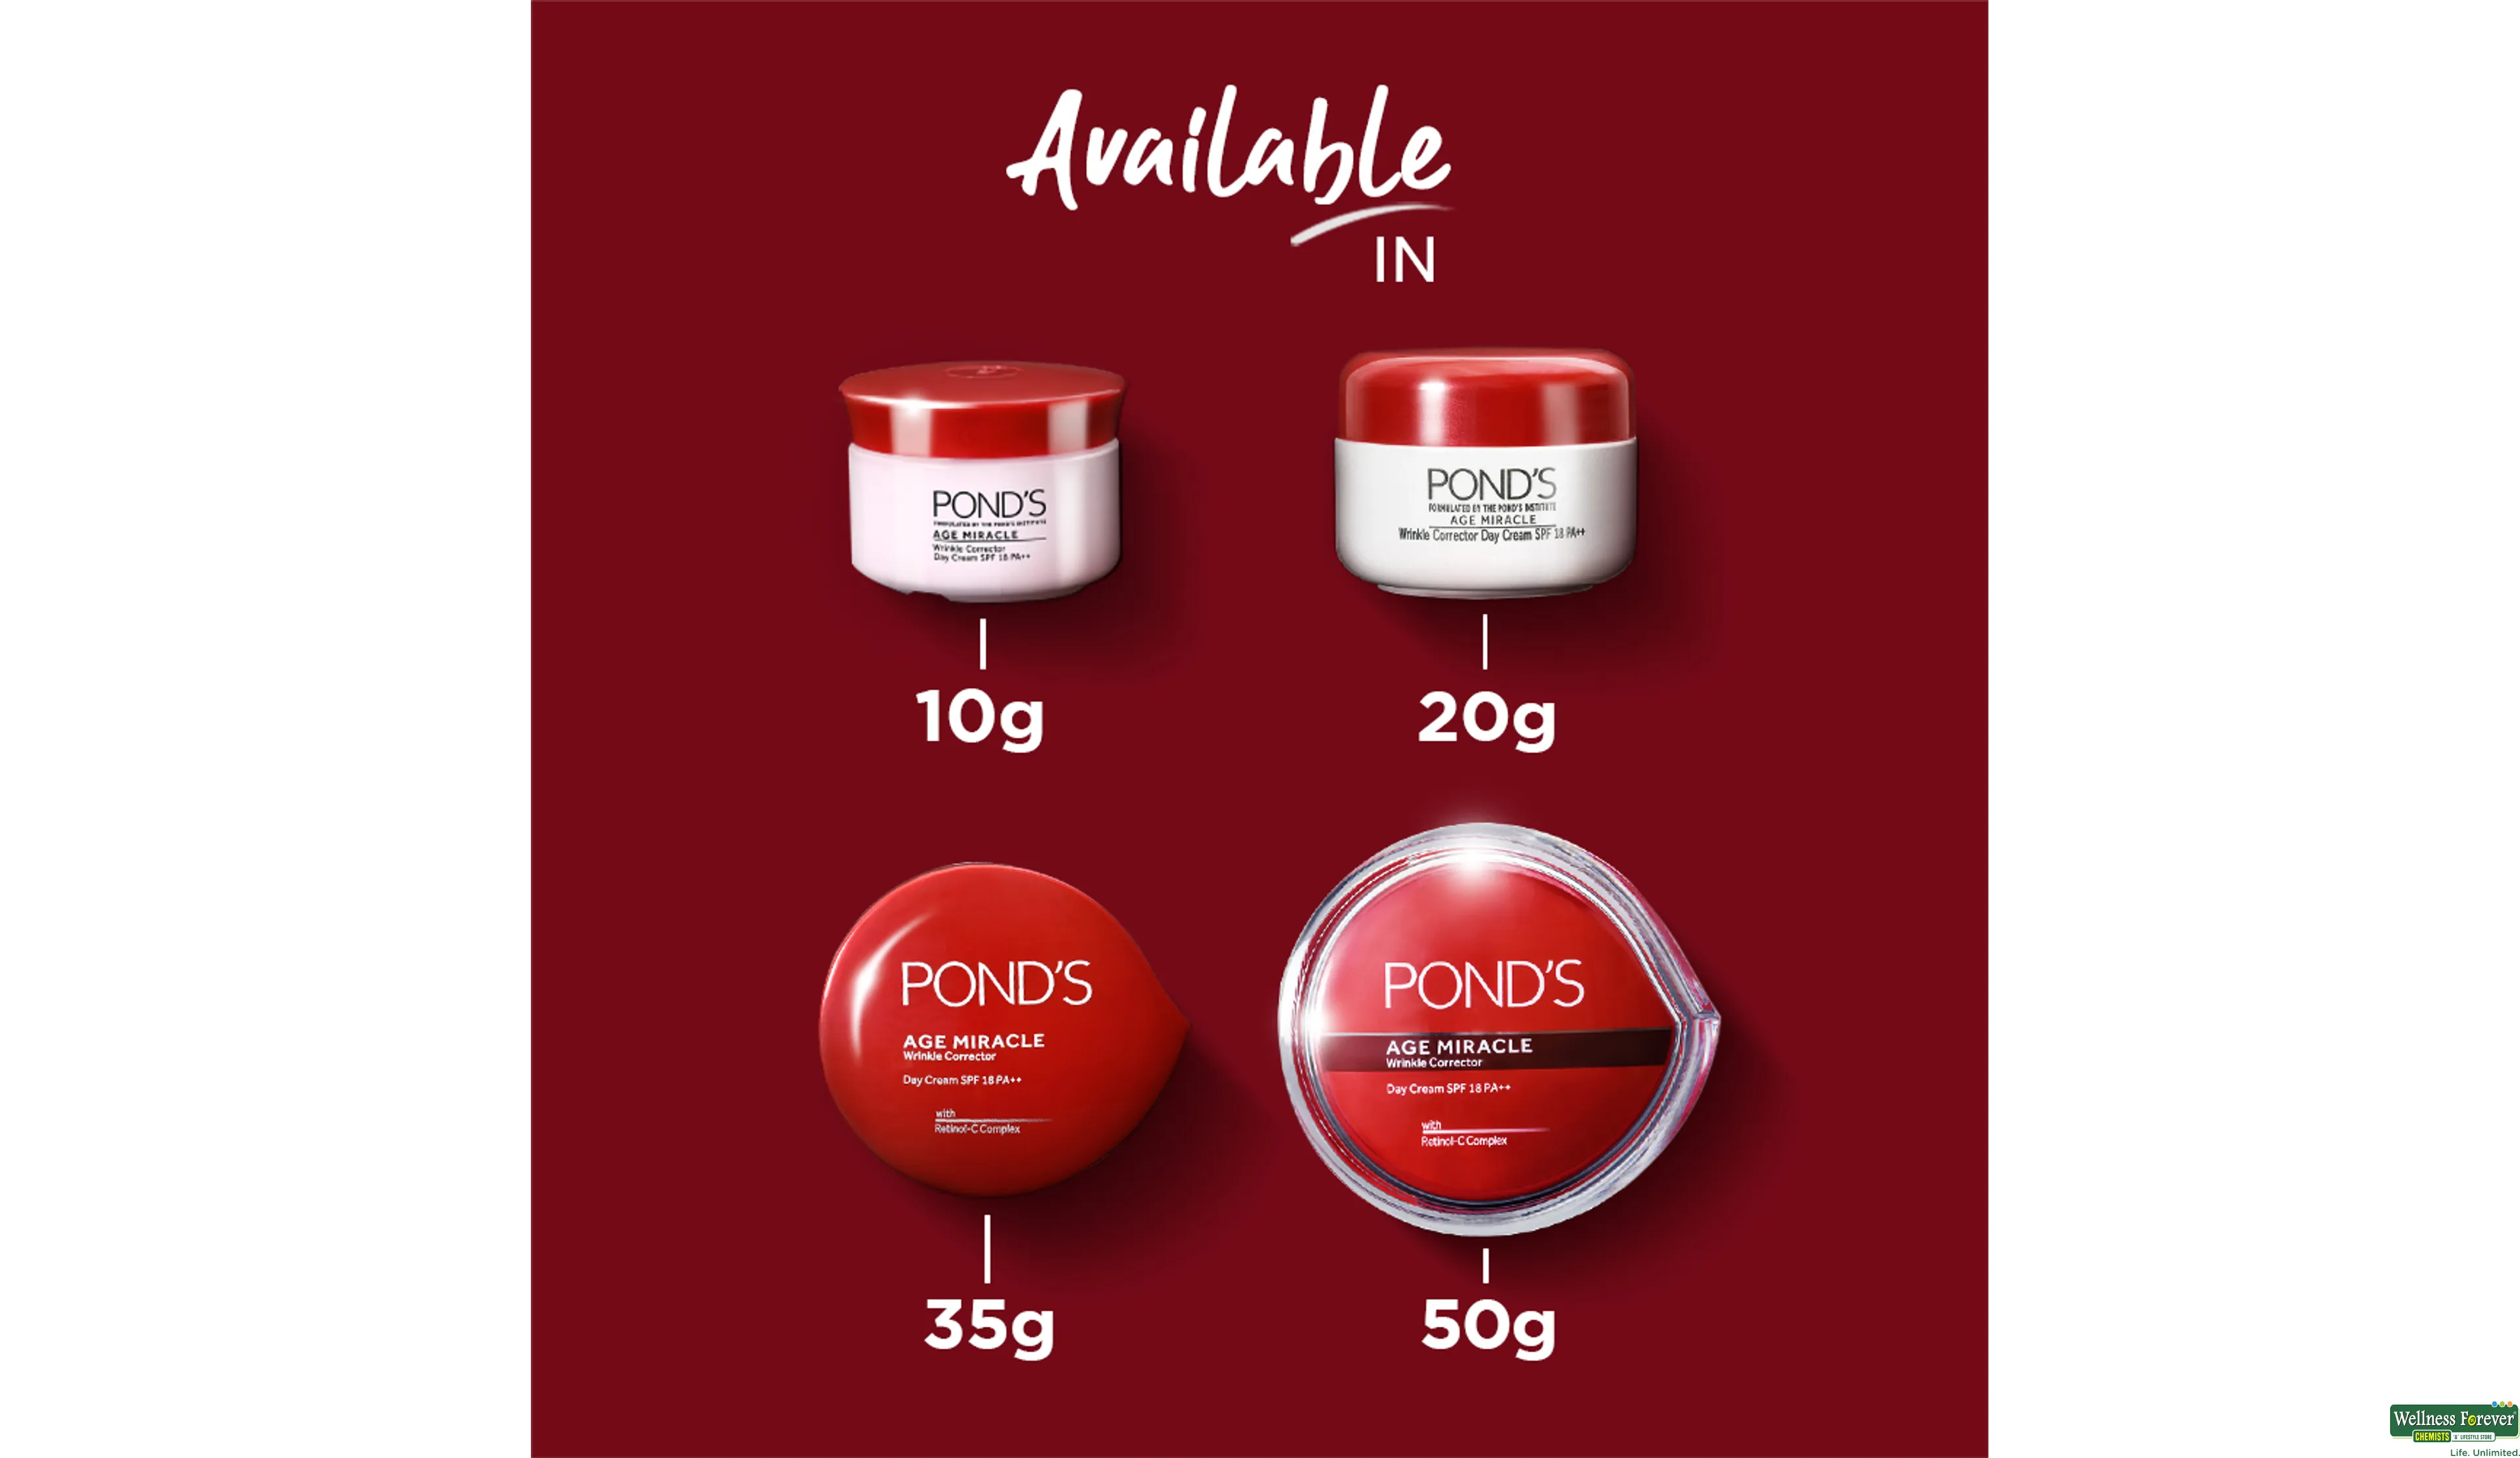 PONDS F/CRM AGE MIRACLE DAY 10GM- 6, 10GM, 